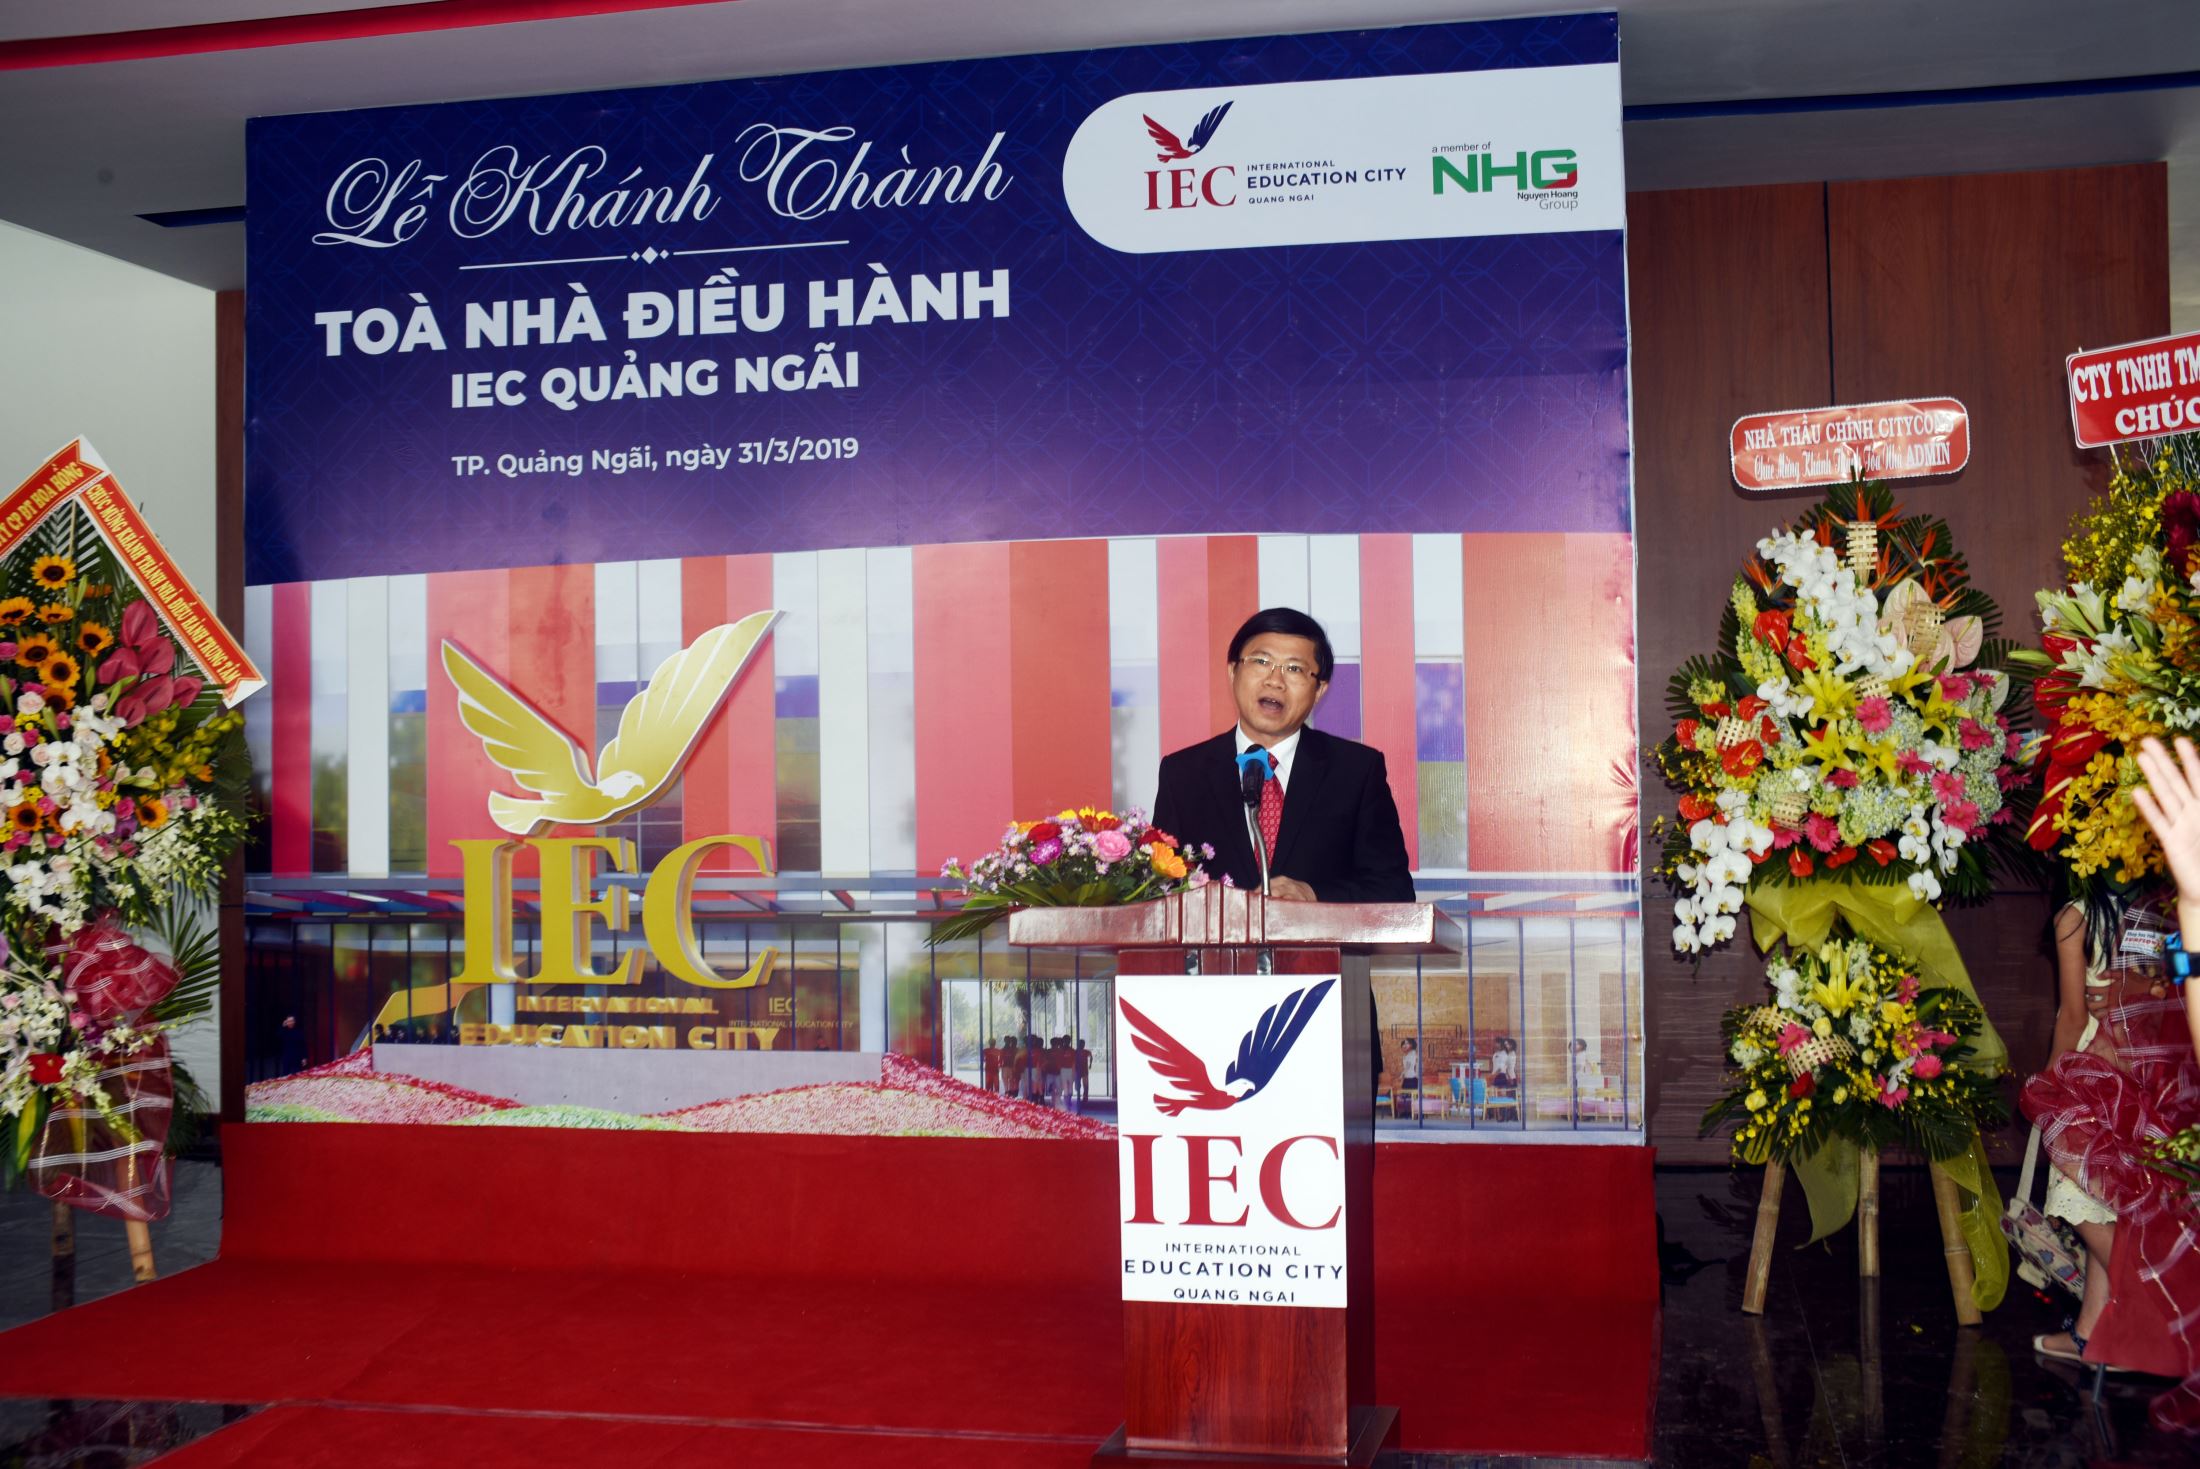 Dr. Pham Van Hung, General Principle of International Education City - IEC Quang Ngai giving the opening speech at the event.